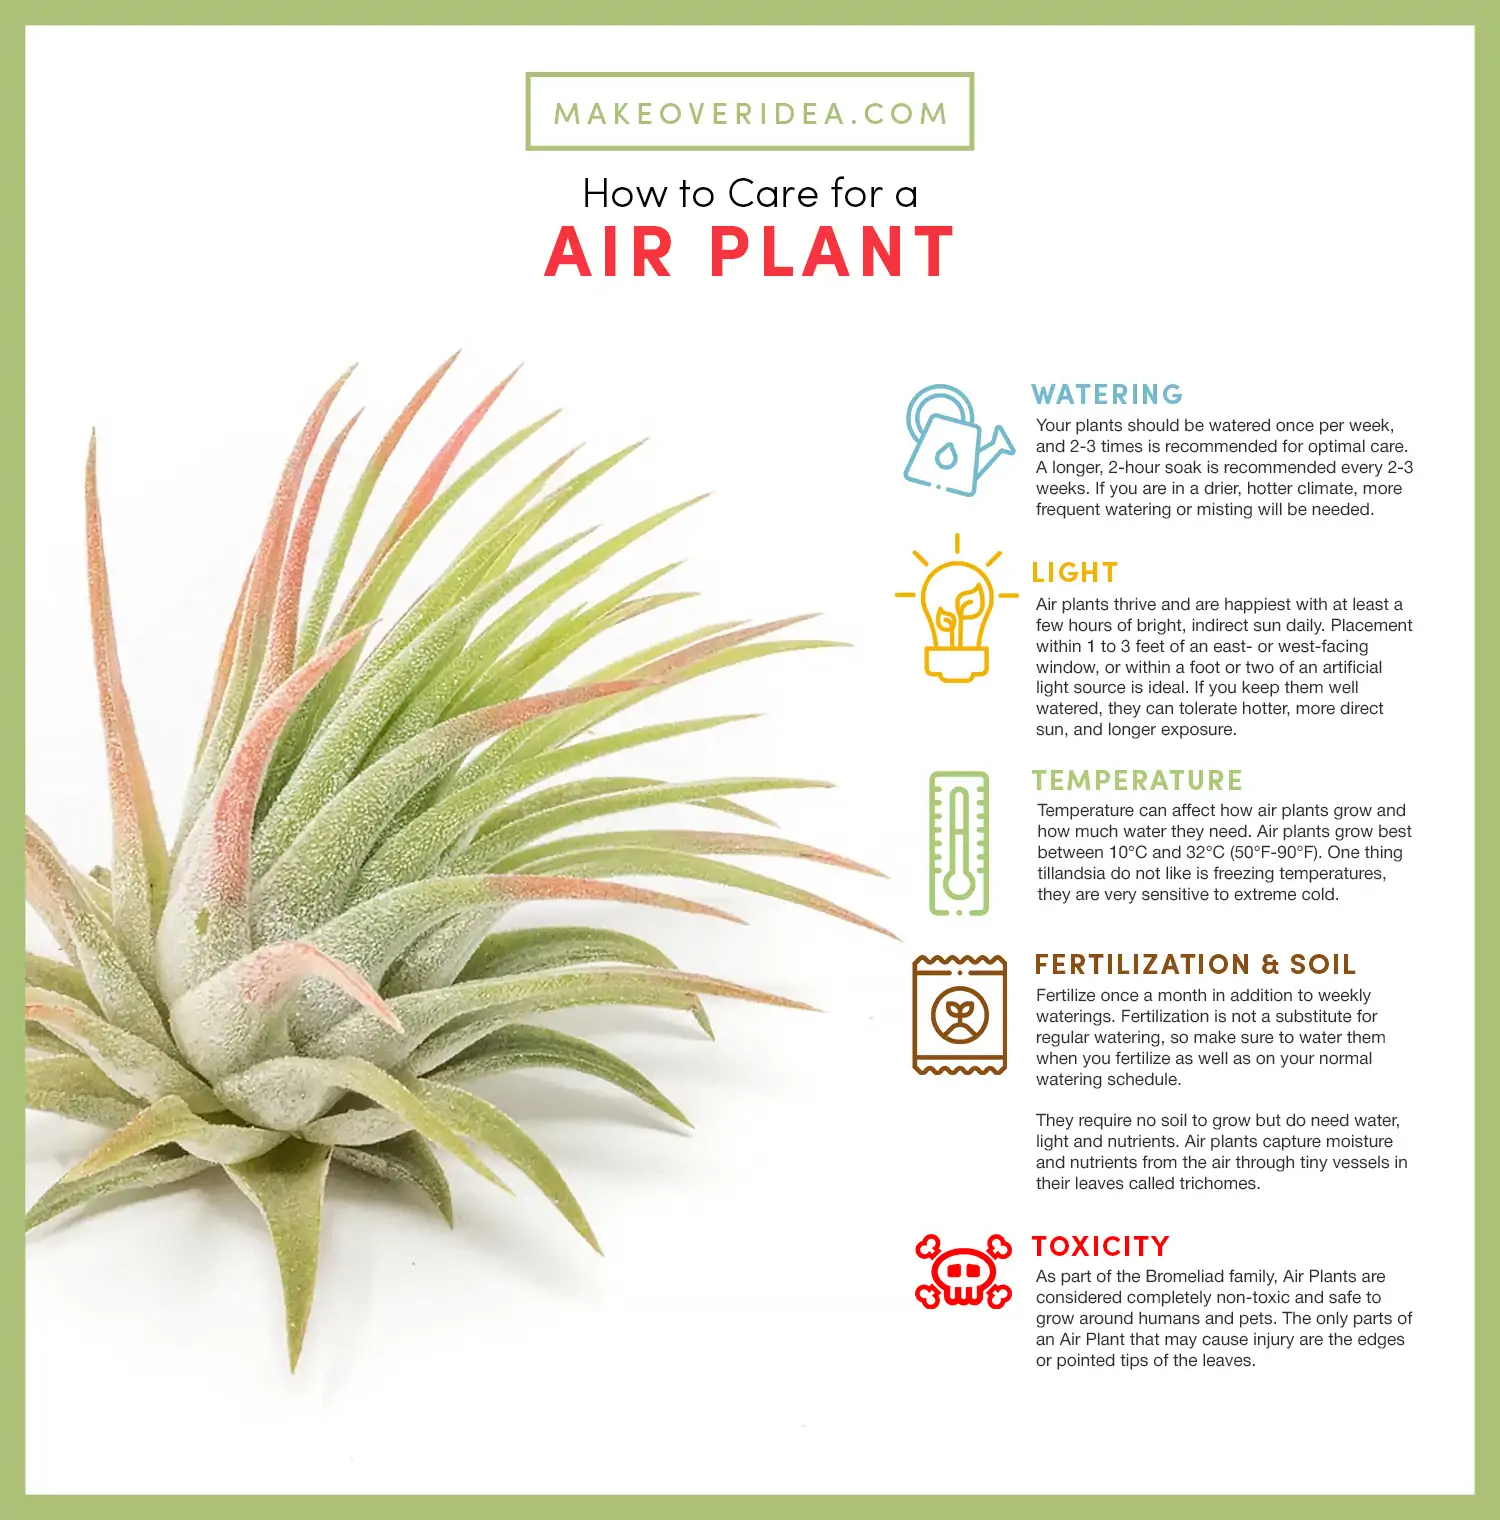 air plant tequirements how to care of Tillandsia chart